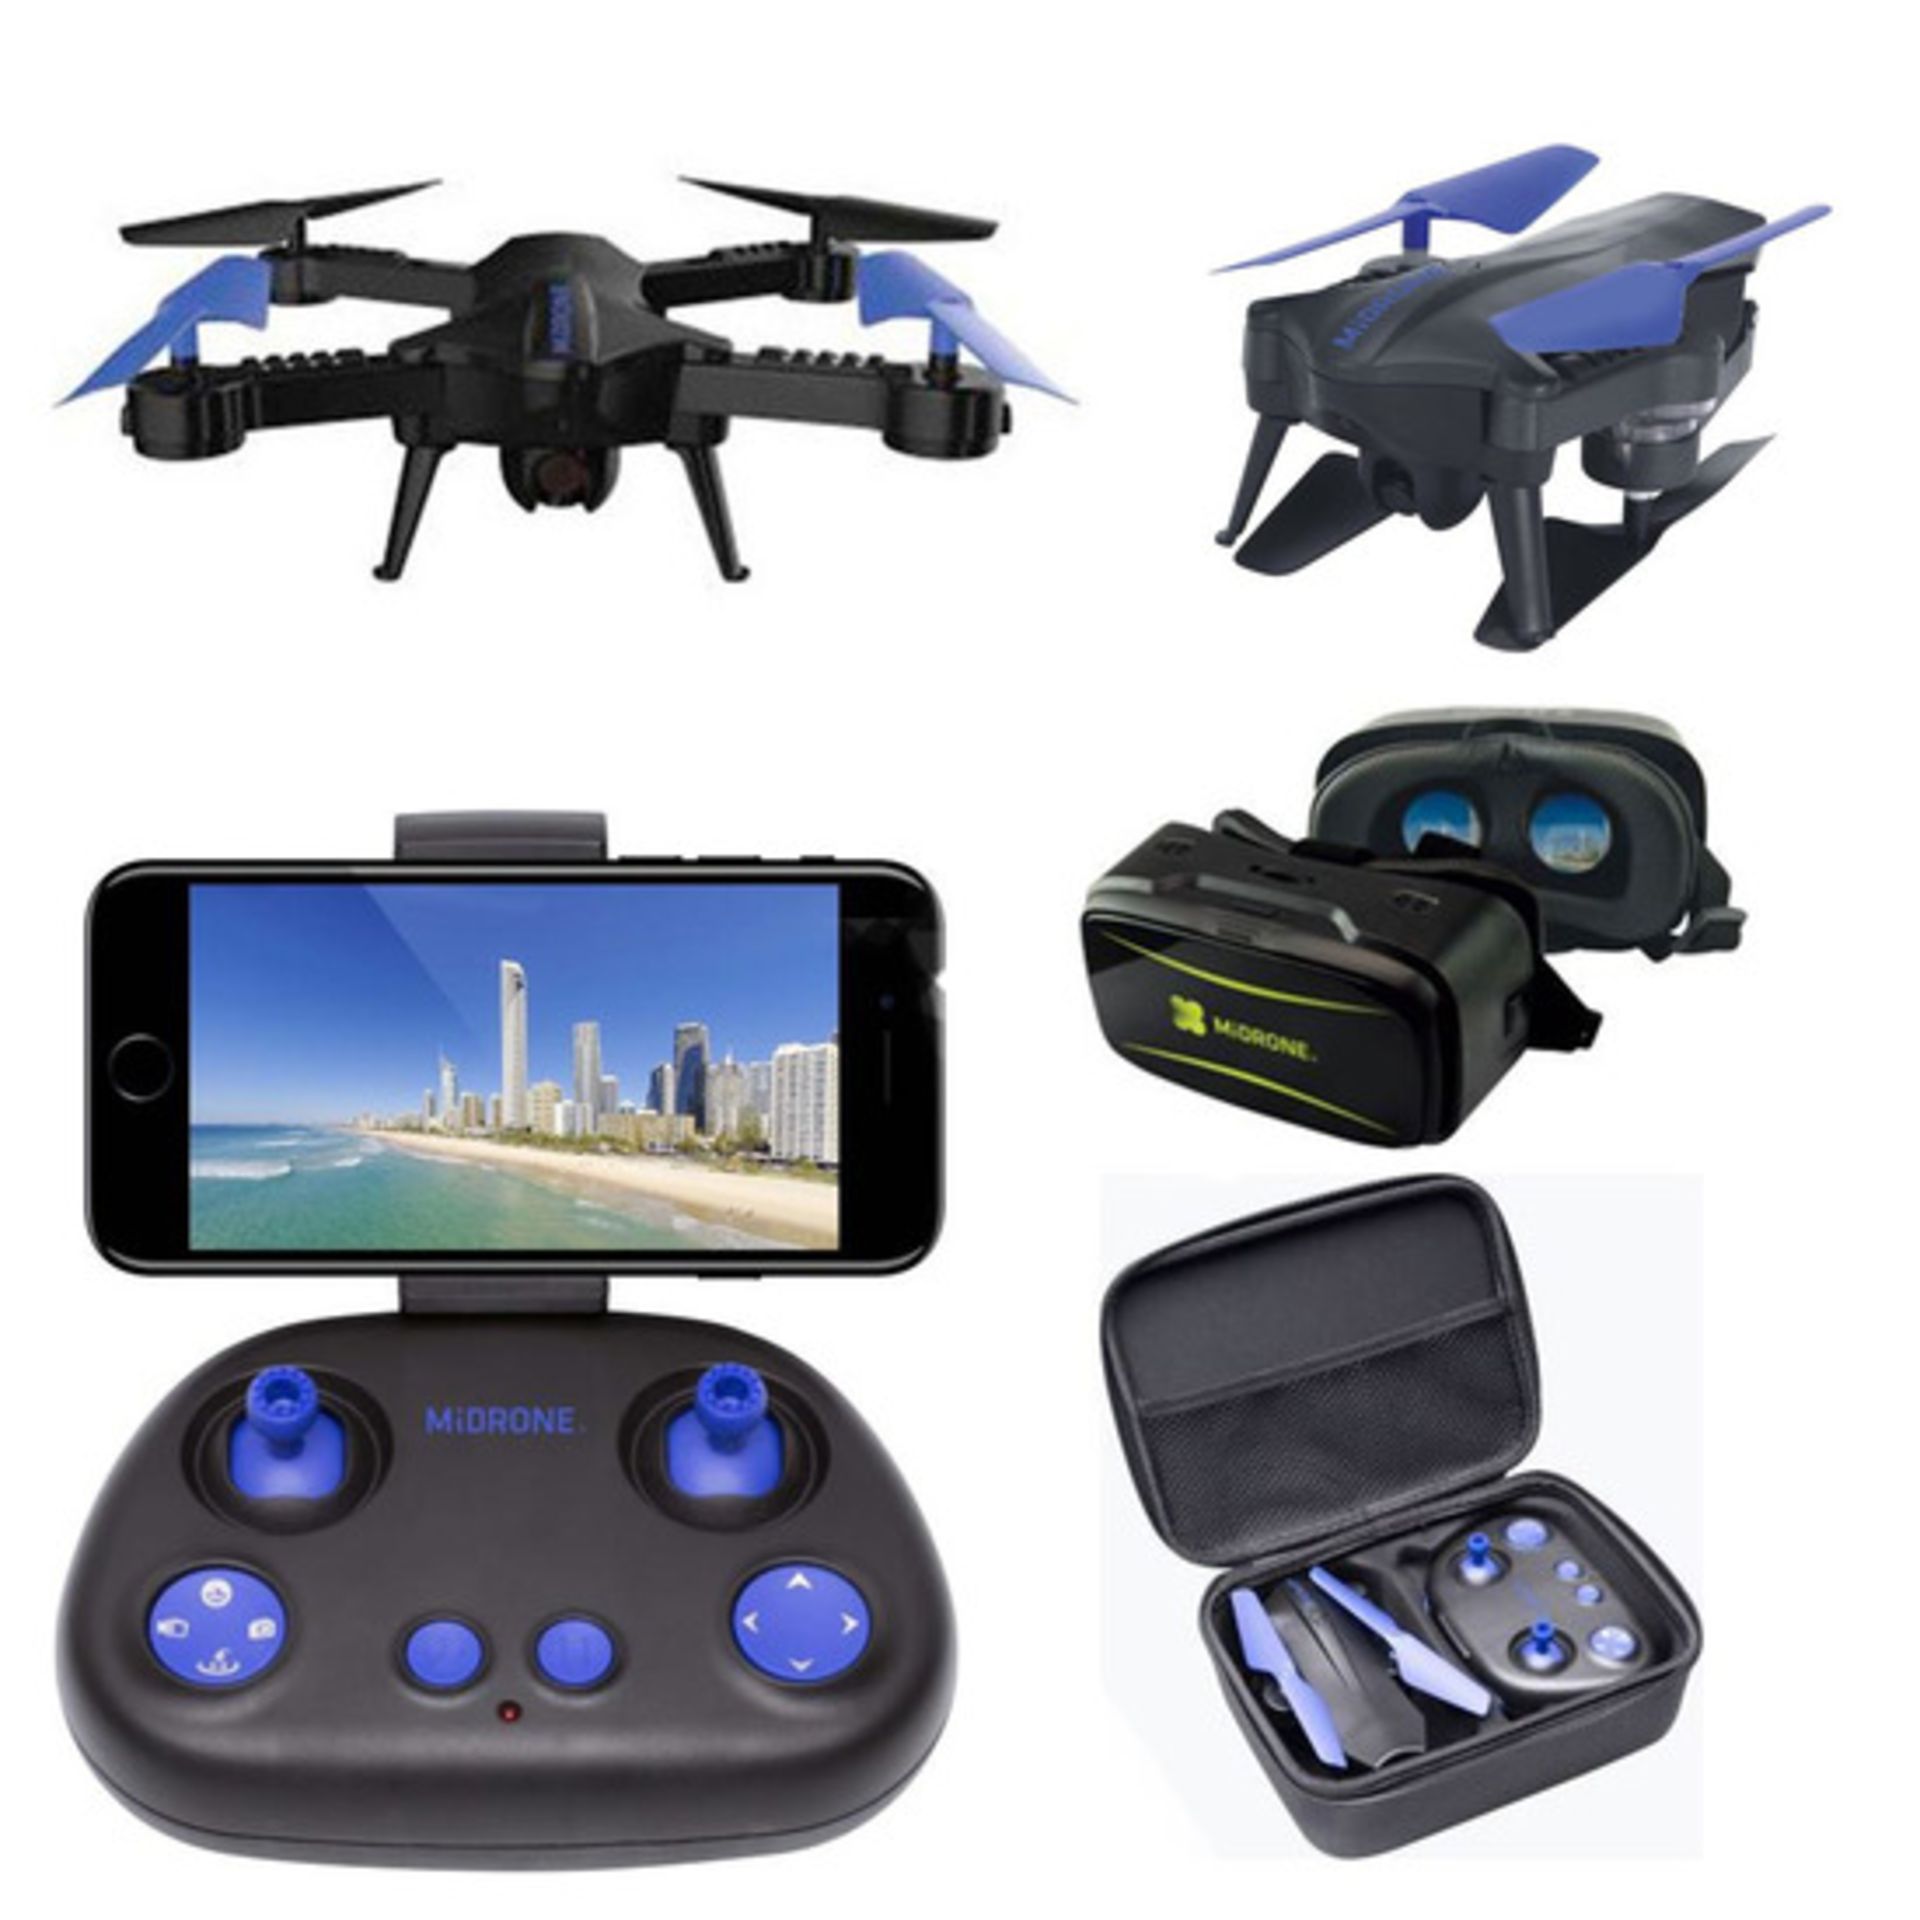 V Brand New MiDrone HD WiFi Drone With Intergrated Full HD Camera PLUS VR Kit (Goggles & Case)